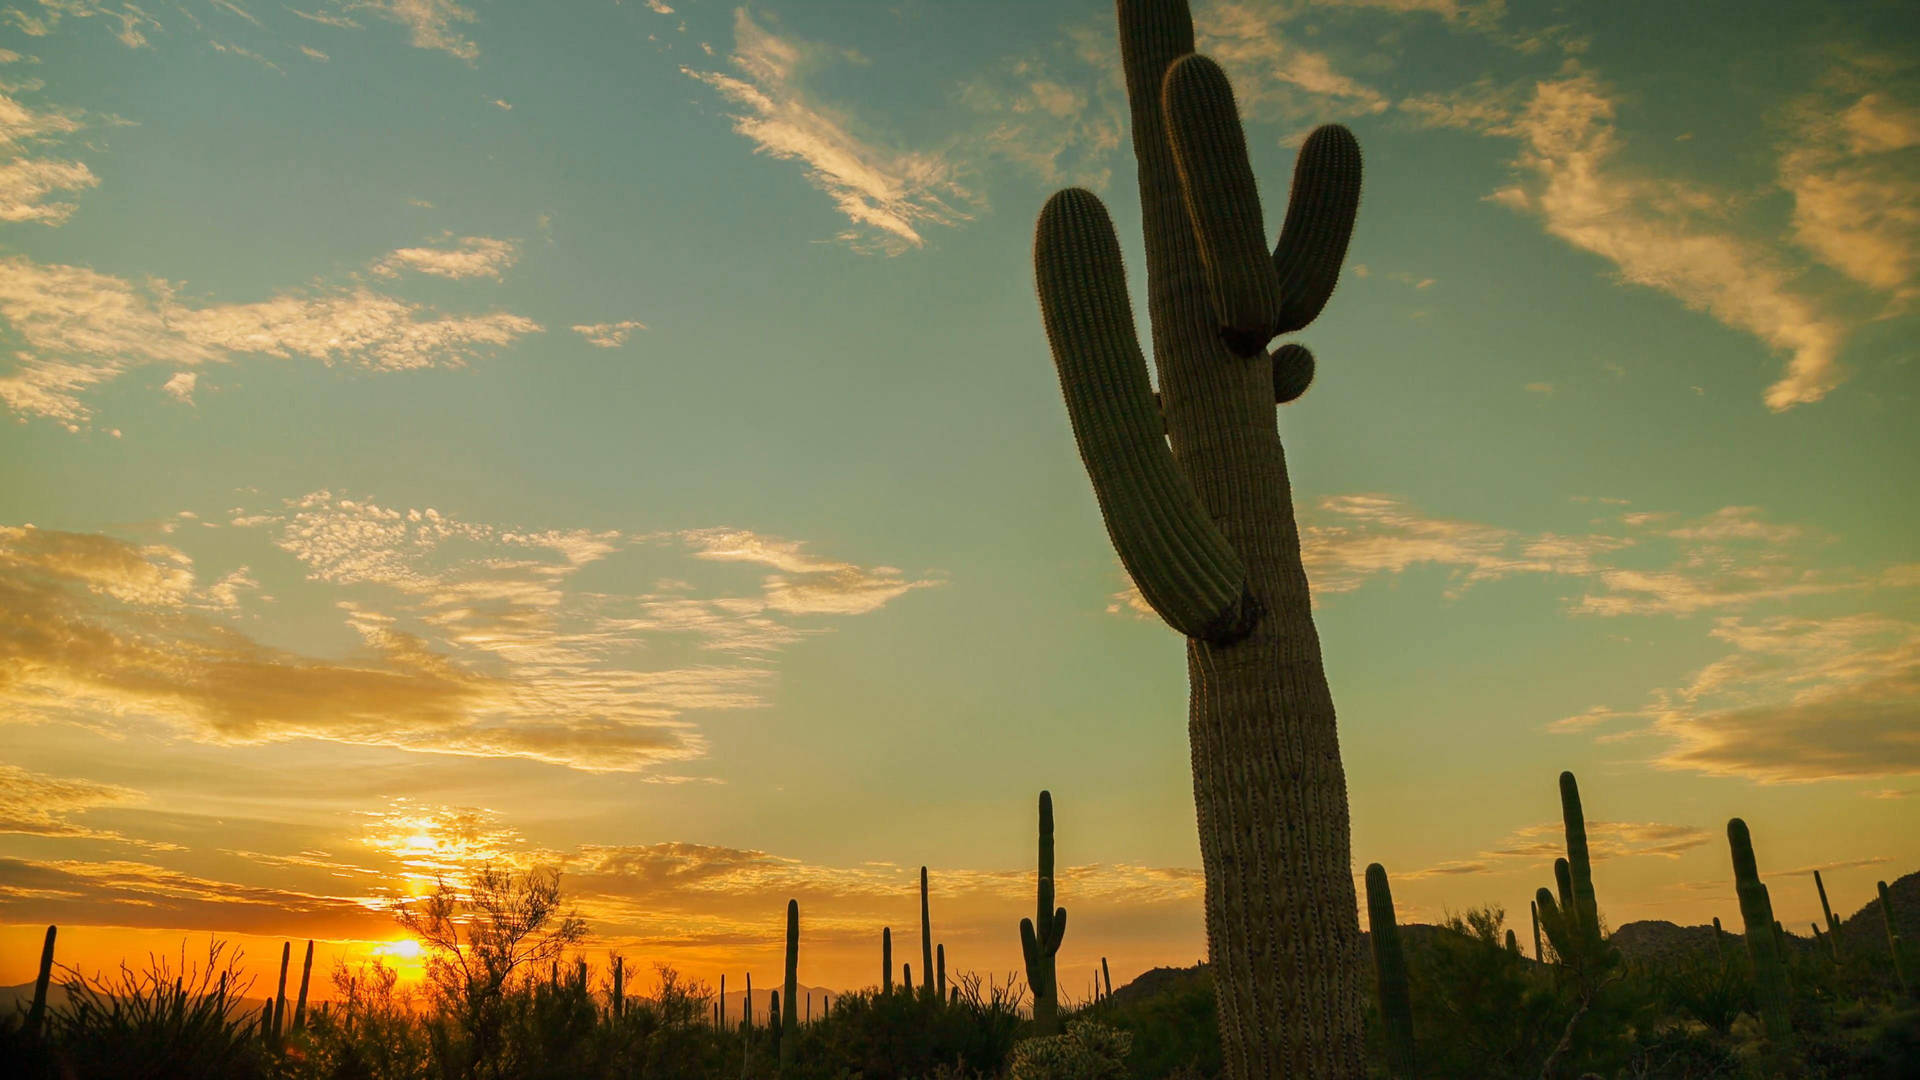 The cactus takes on a beautiful pink hue at sunset Wallpaper